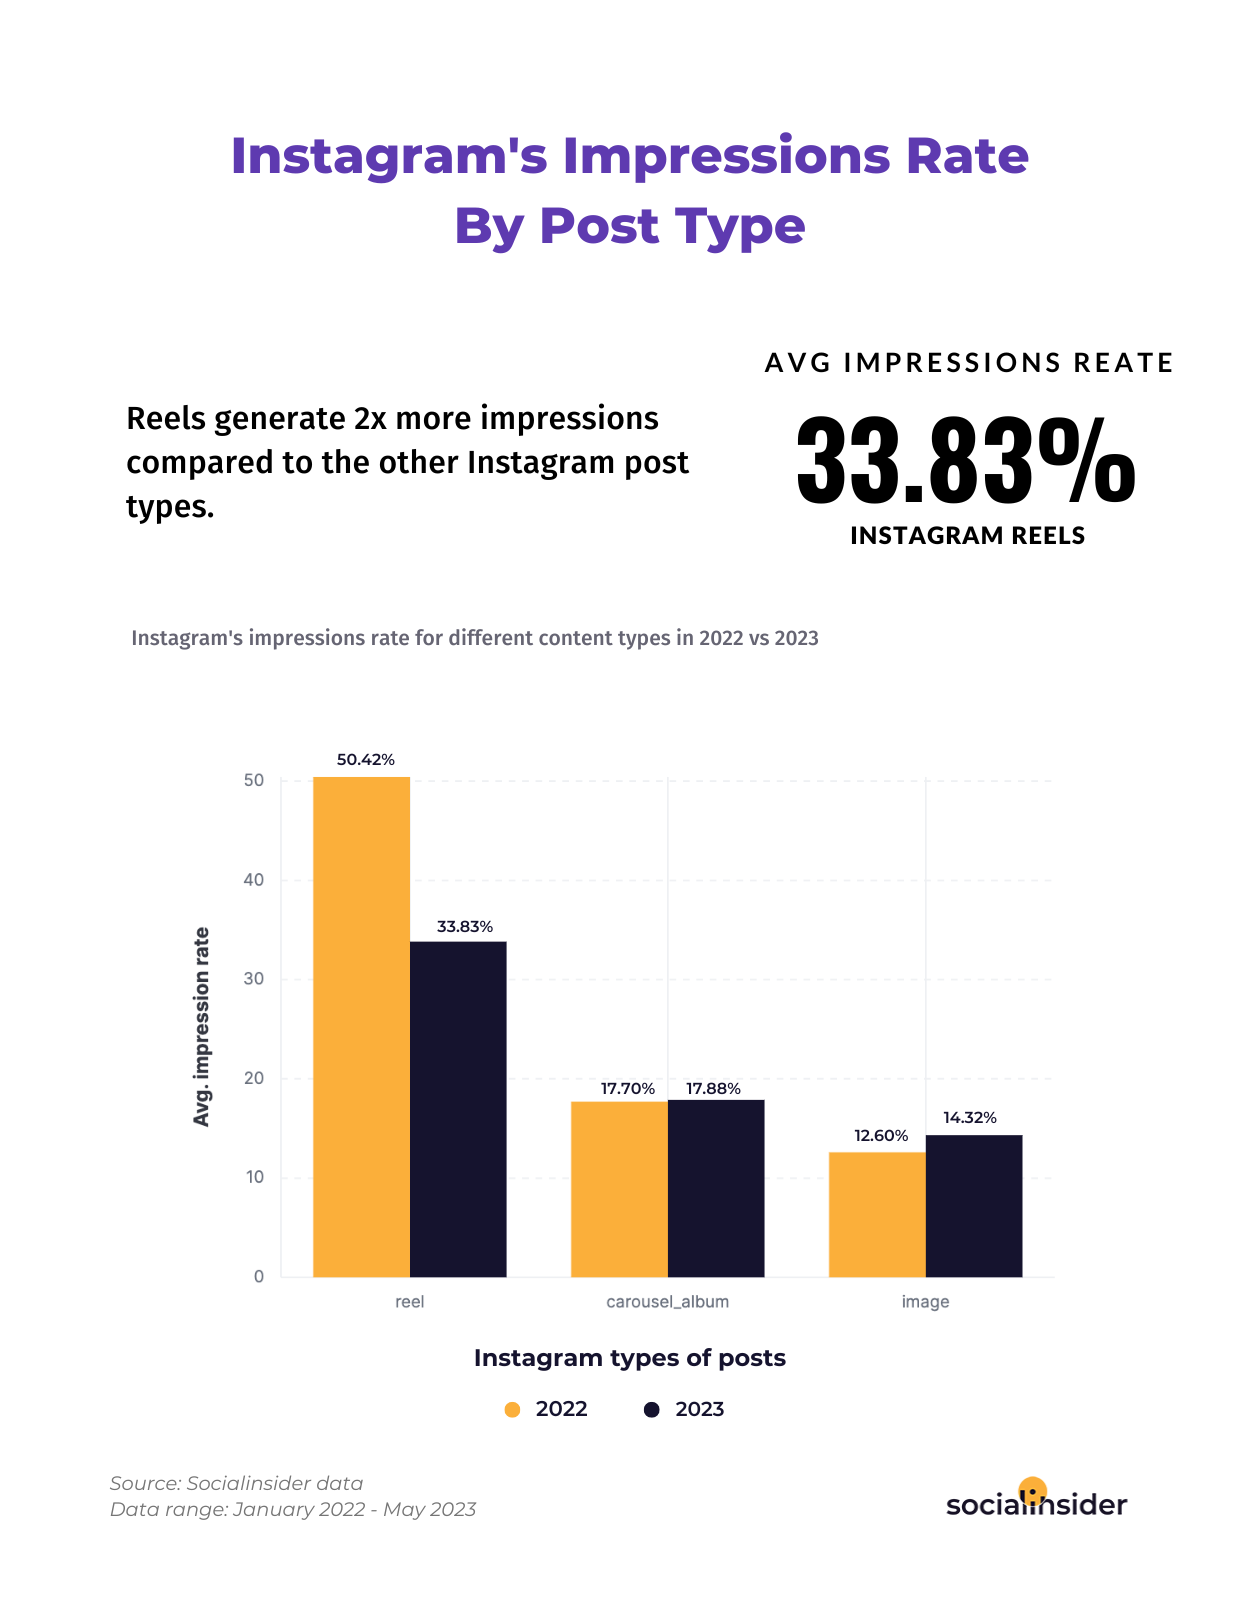 This is a chart showing what's the average impression rate on Instagram for different content types across 2022 and 2023.